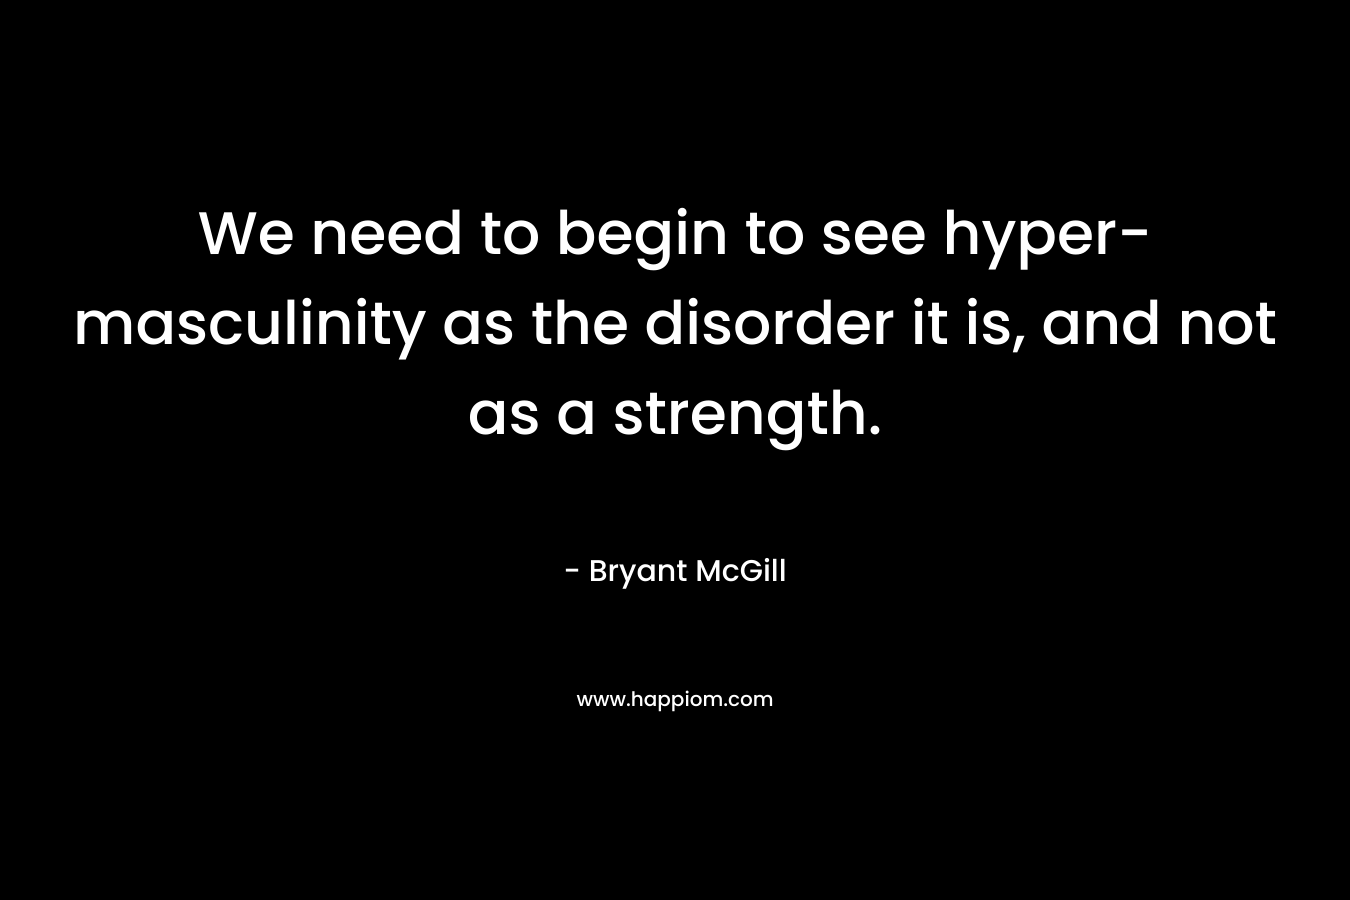 We need to begin to see hyper-masculinity as the disorder it is, and not as a strength. – Bryant McGill